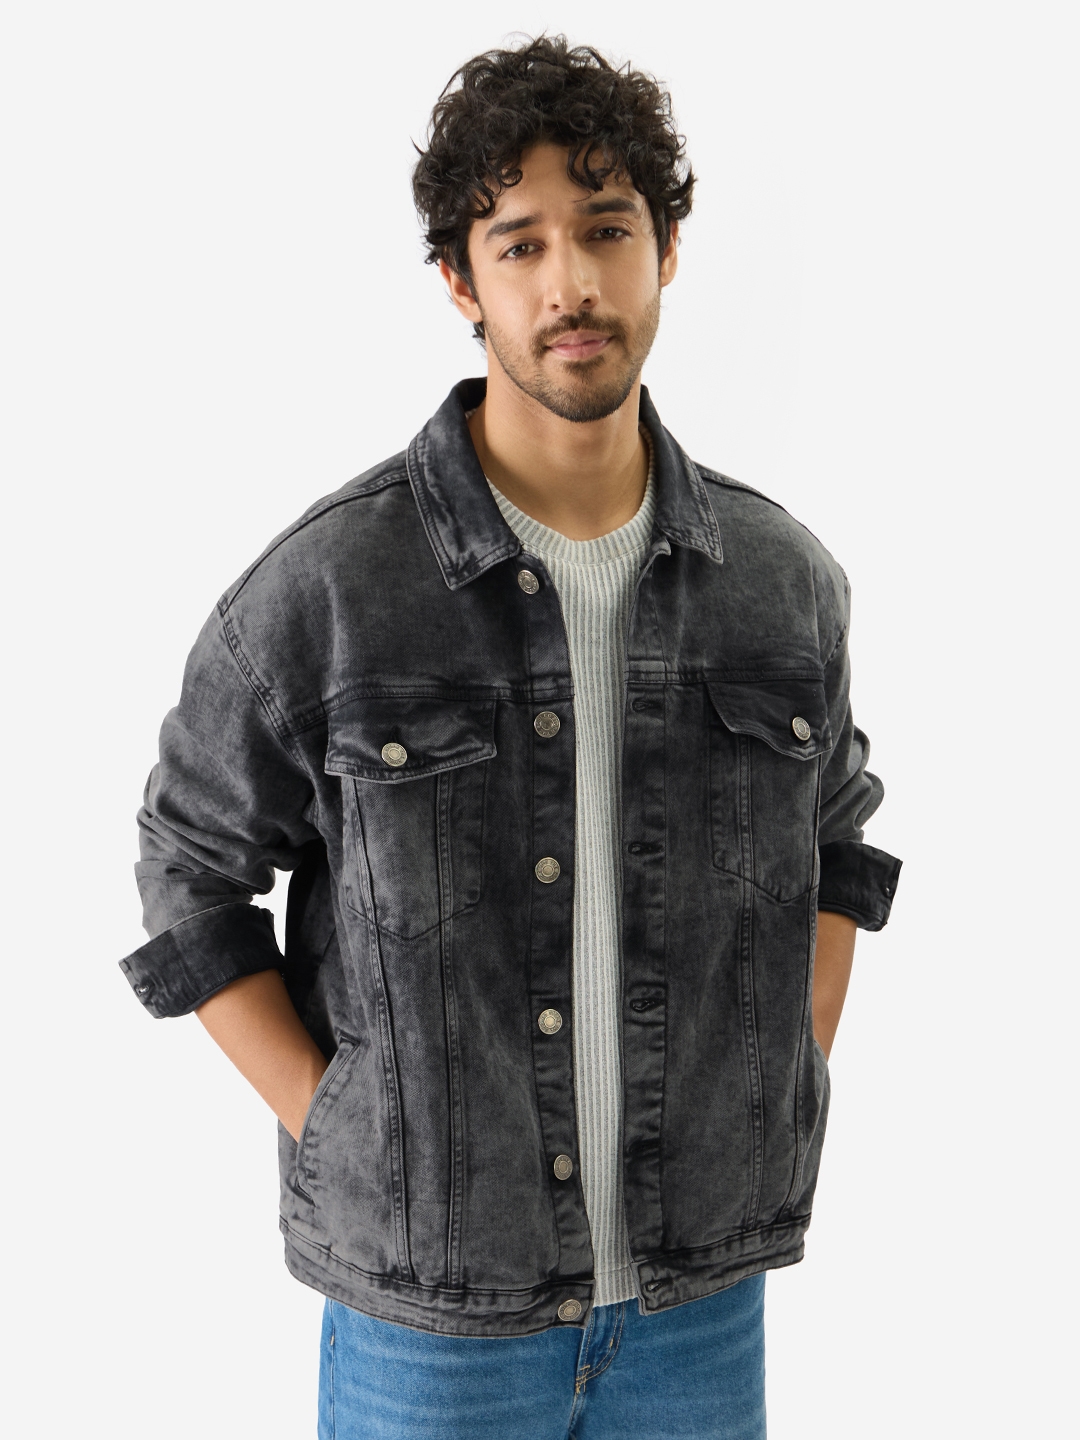 The Souled Store | Men's Solids Ebony Casual Shirt